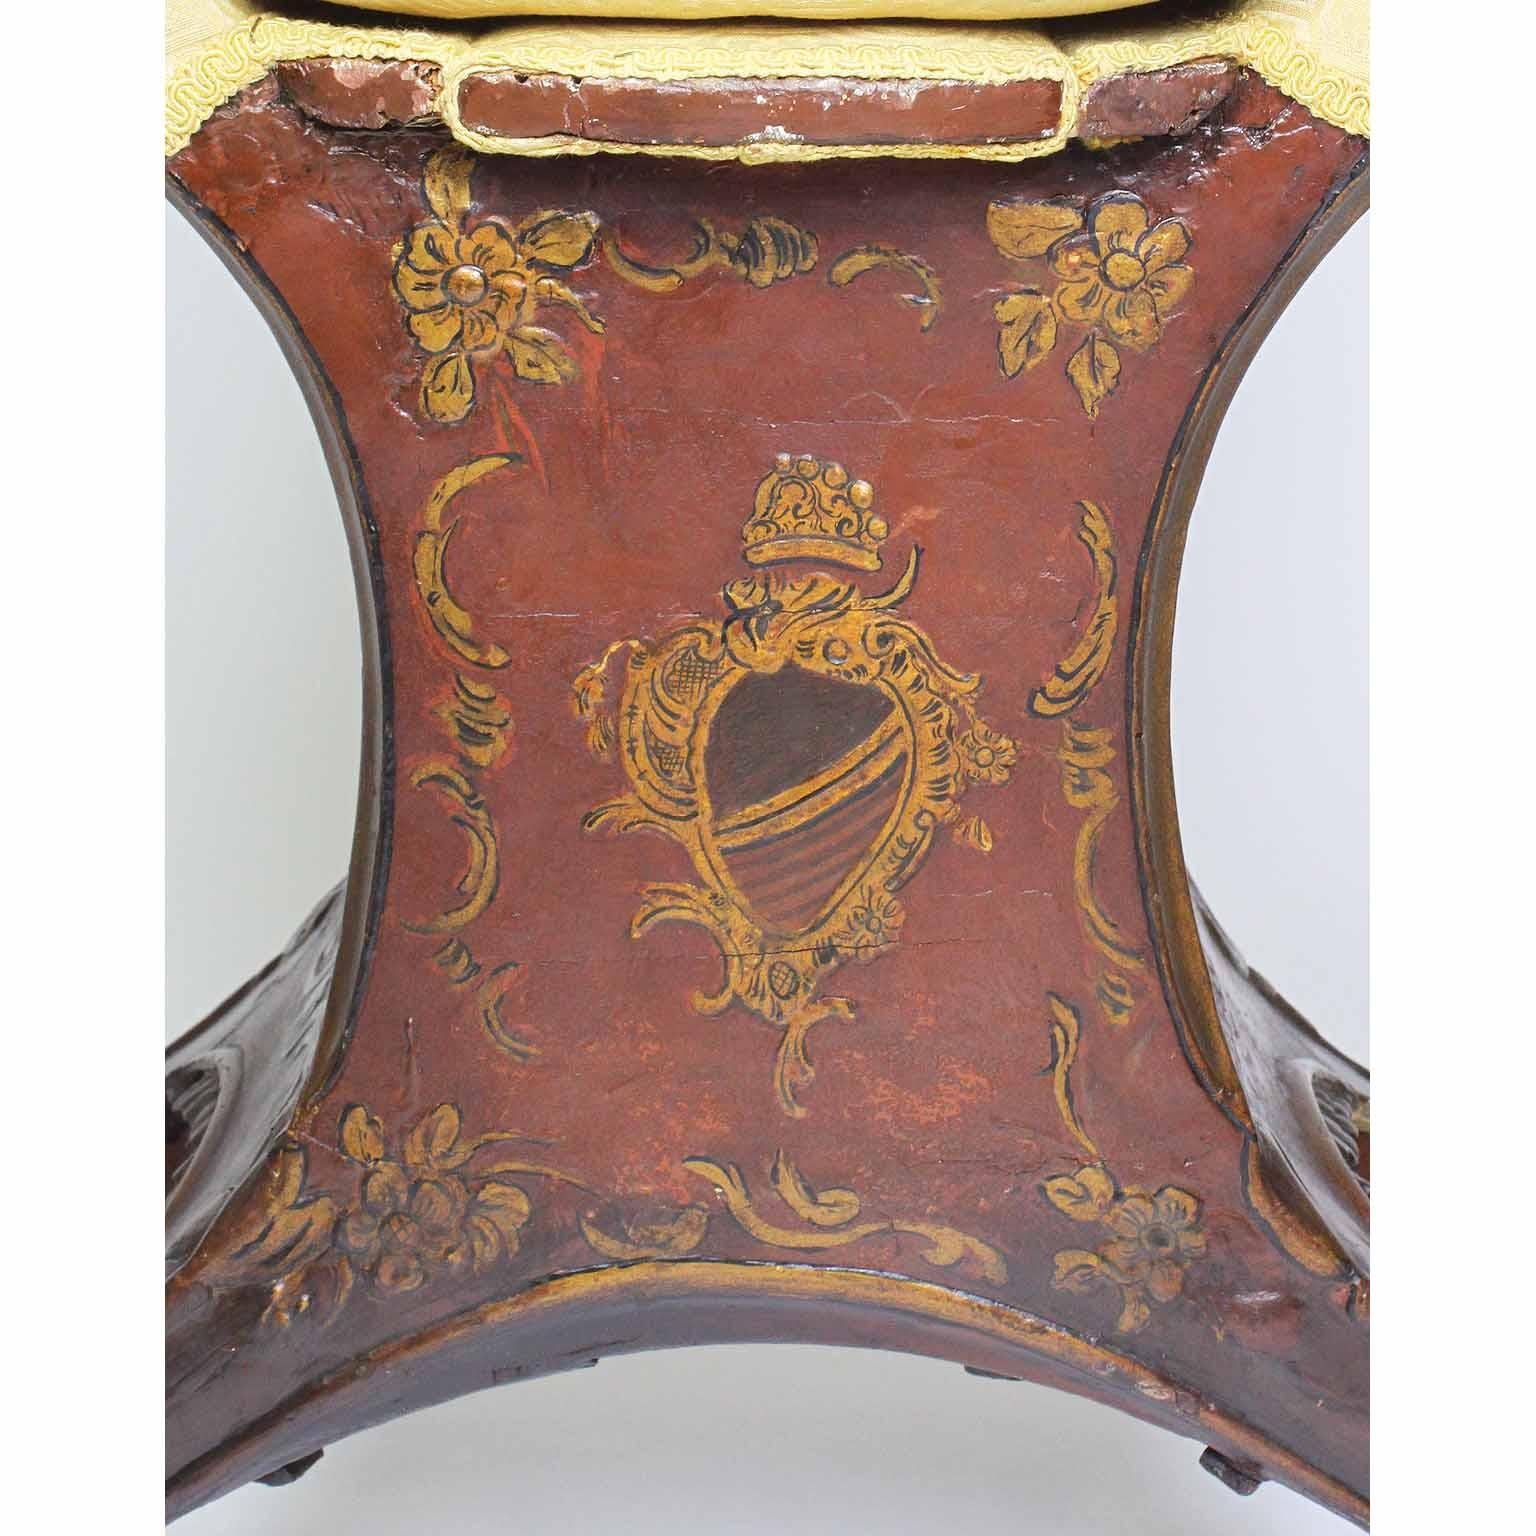 Hand-Painted Rare Venetian 18th-19th Century Chinoiserie Red-Lacquer and Gilt Gondola Chair